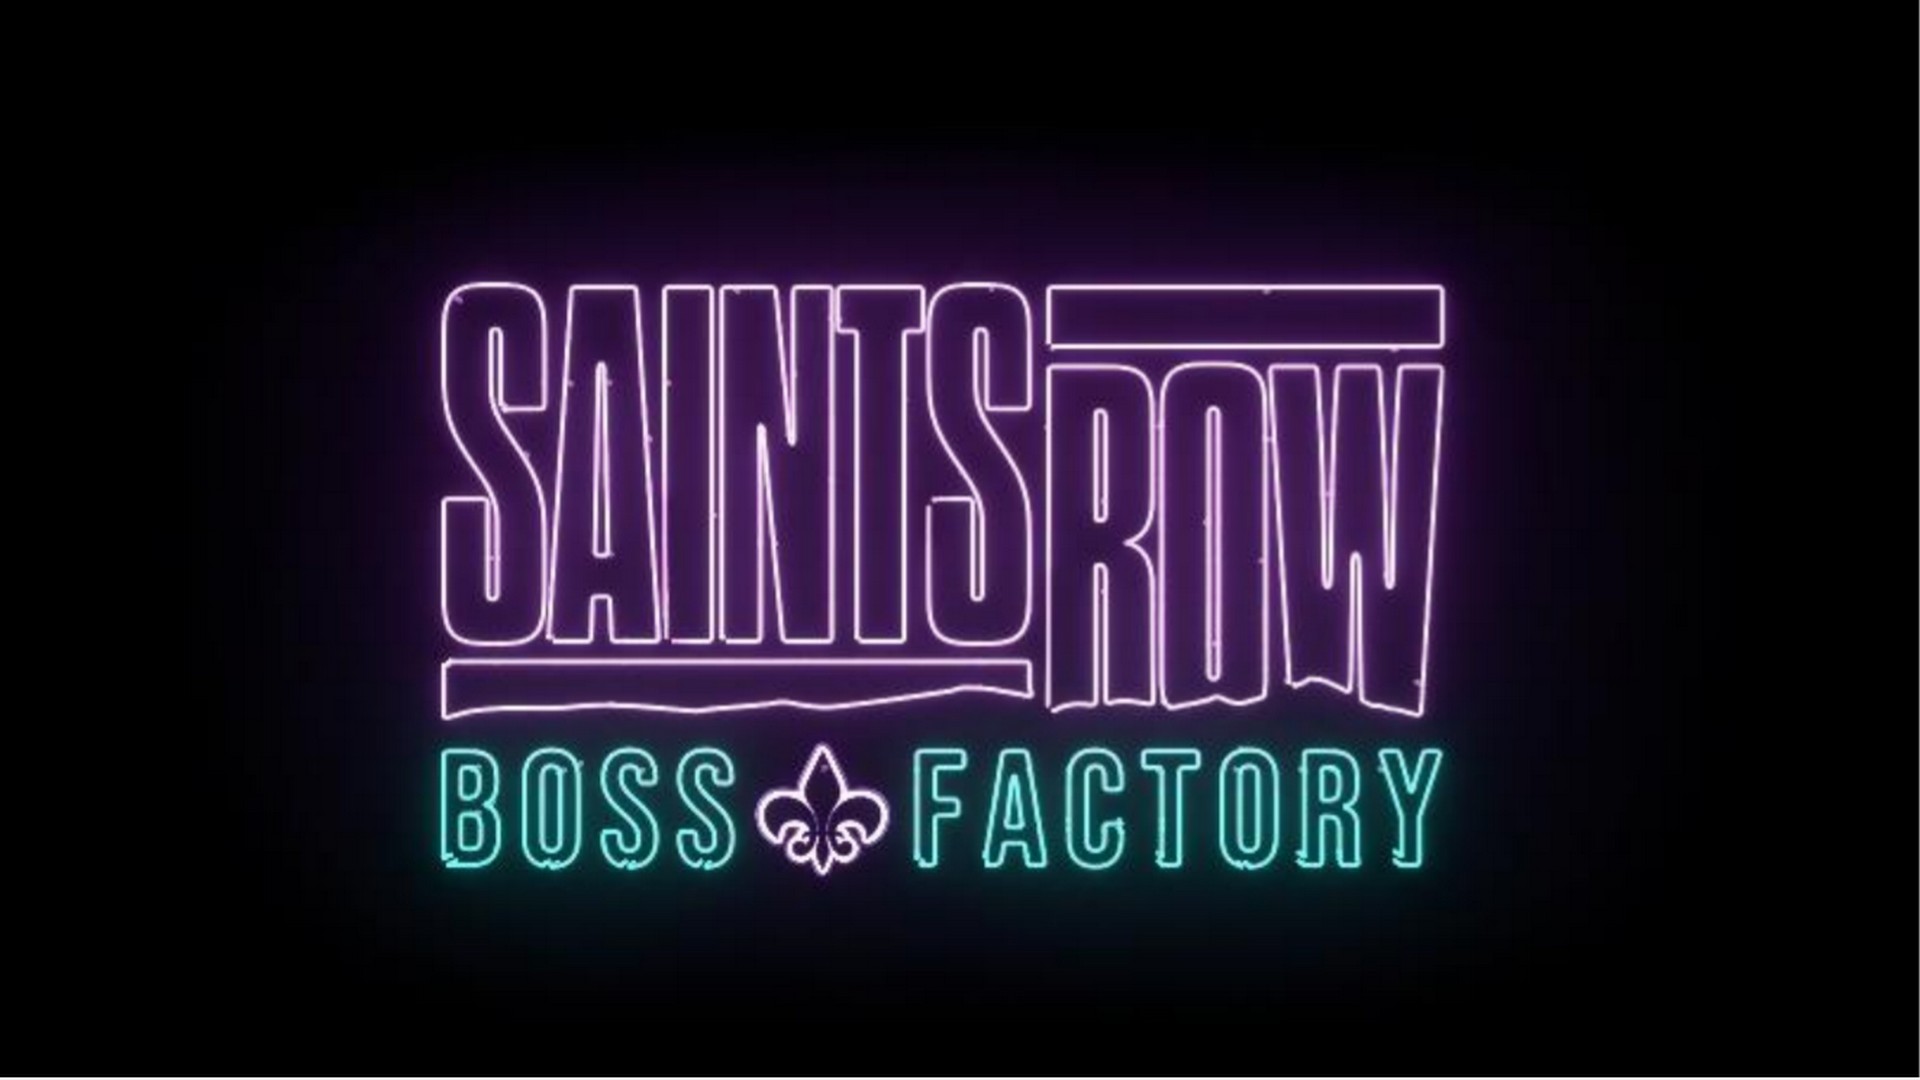 Download The Saints Row Boss Factory Today